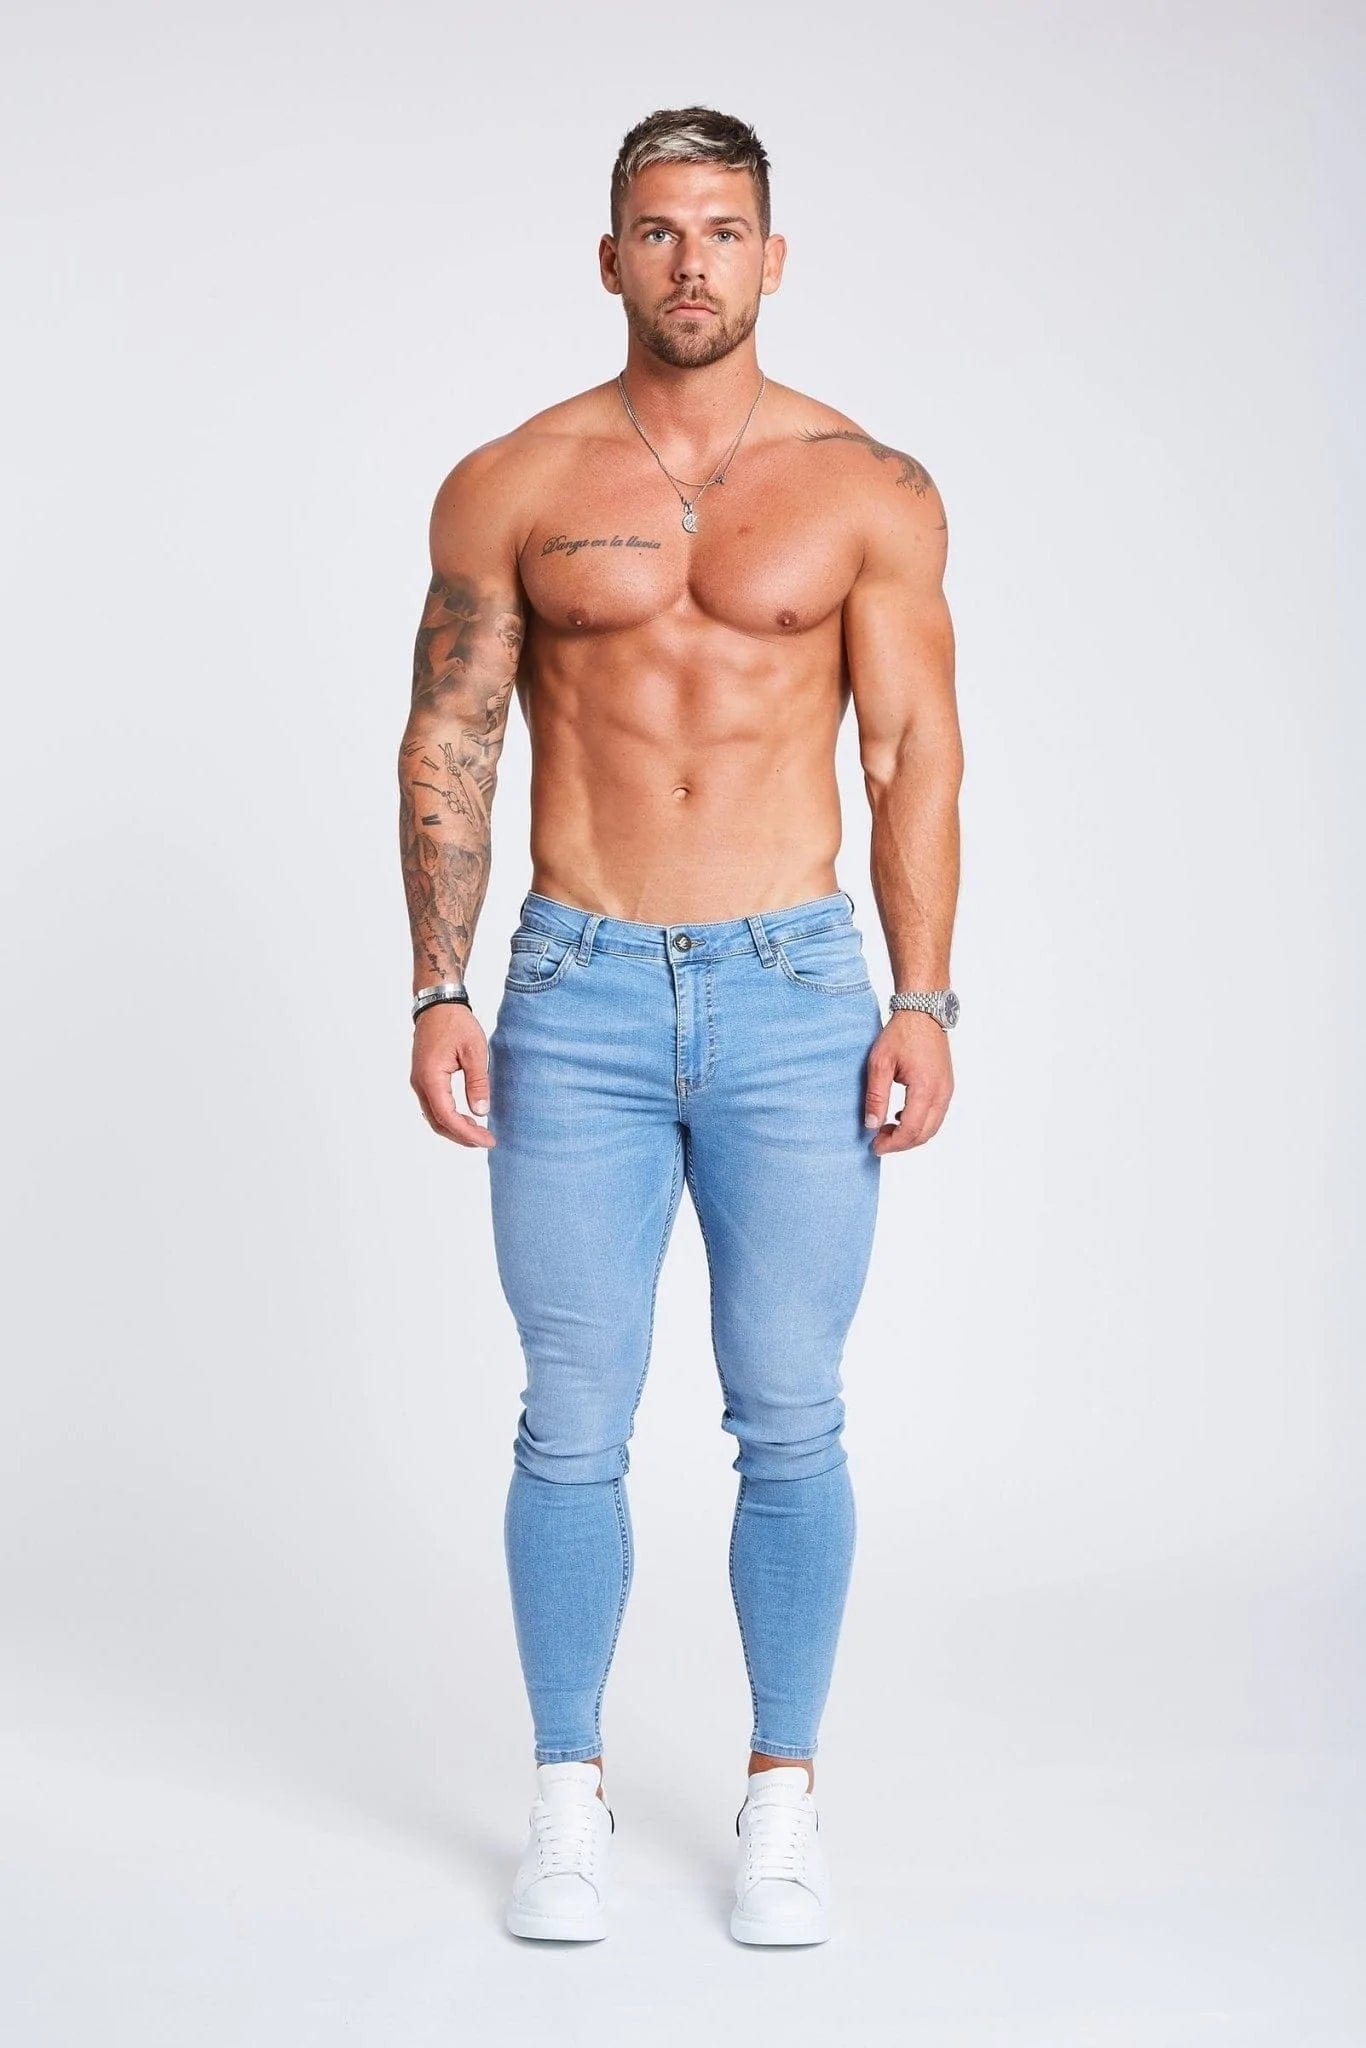 LIGHT BLUE JEANS - NON RIPPED